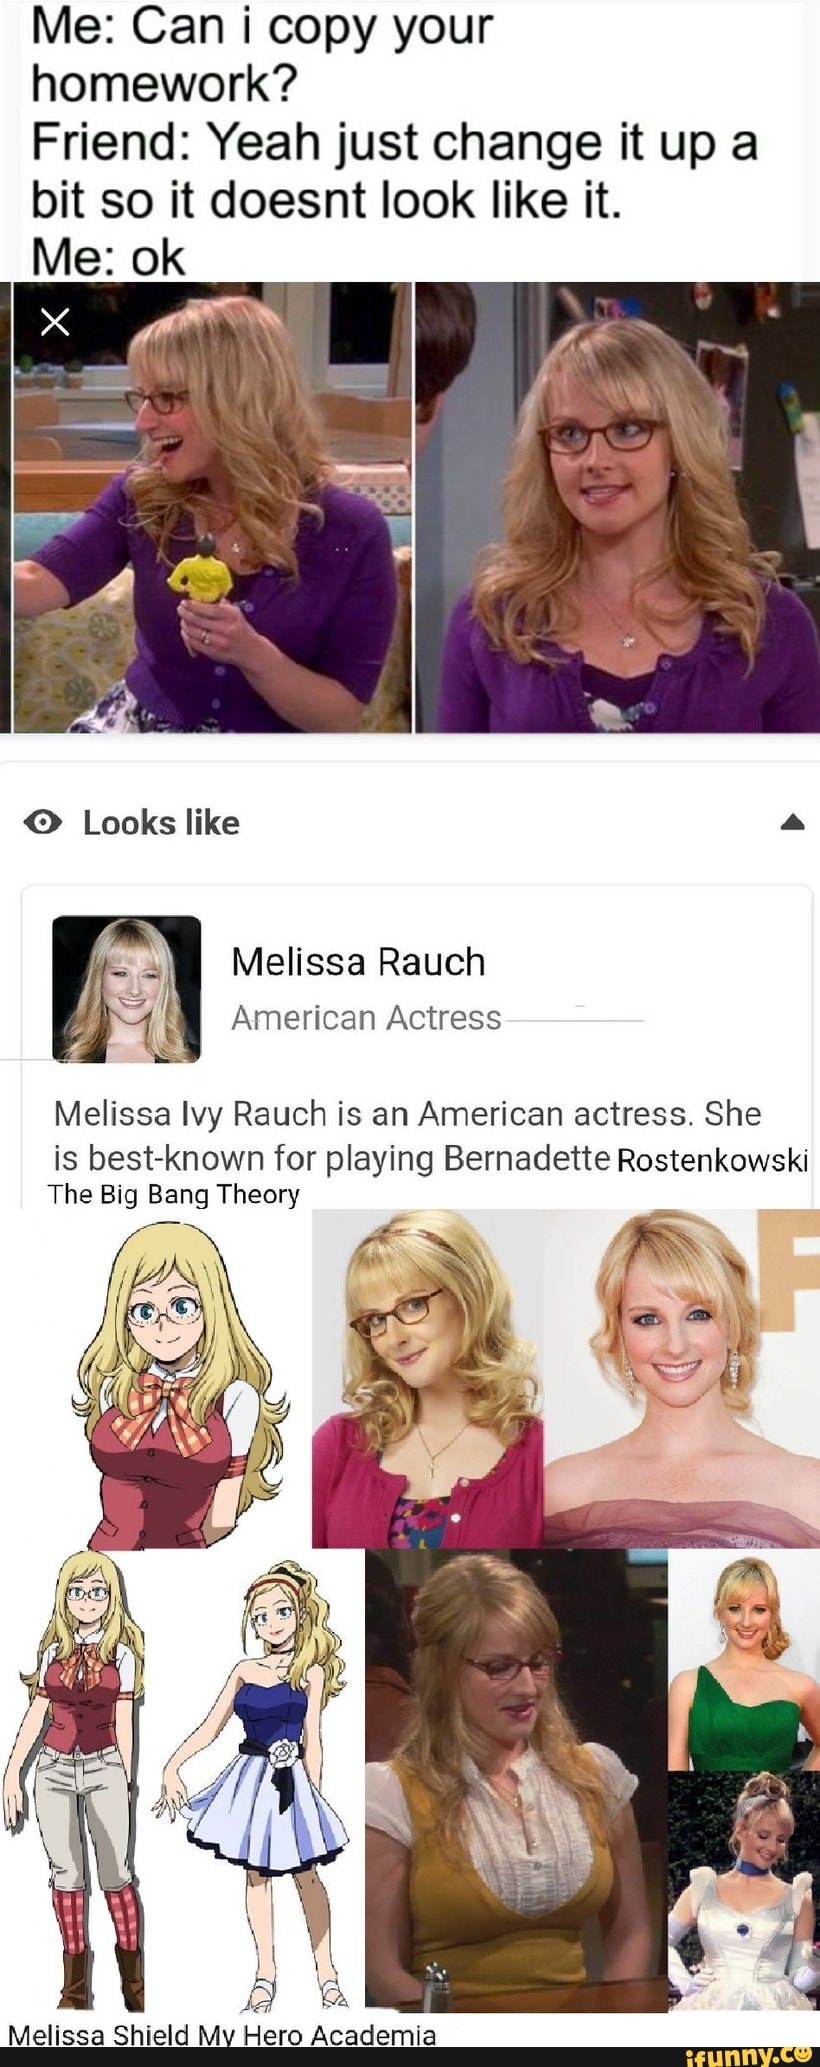 Melissa Rauch Porn Captions - Me: Can i copy your homework? Friend: Yeah just change it up a bit so it